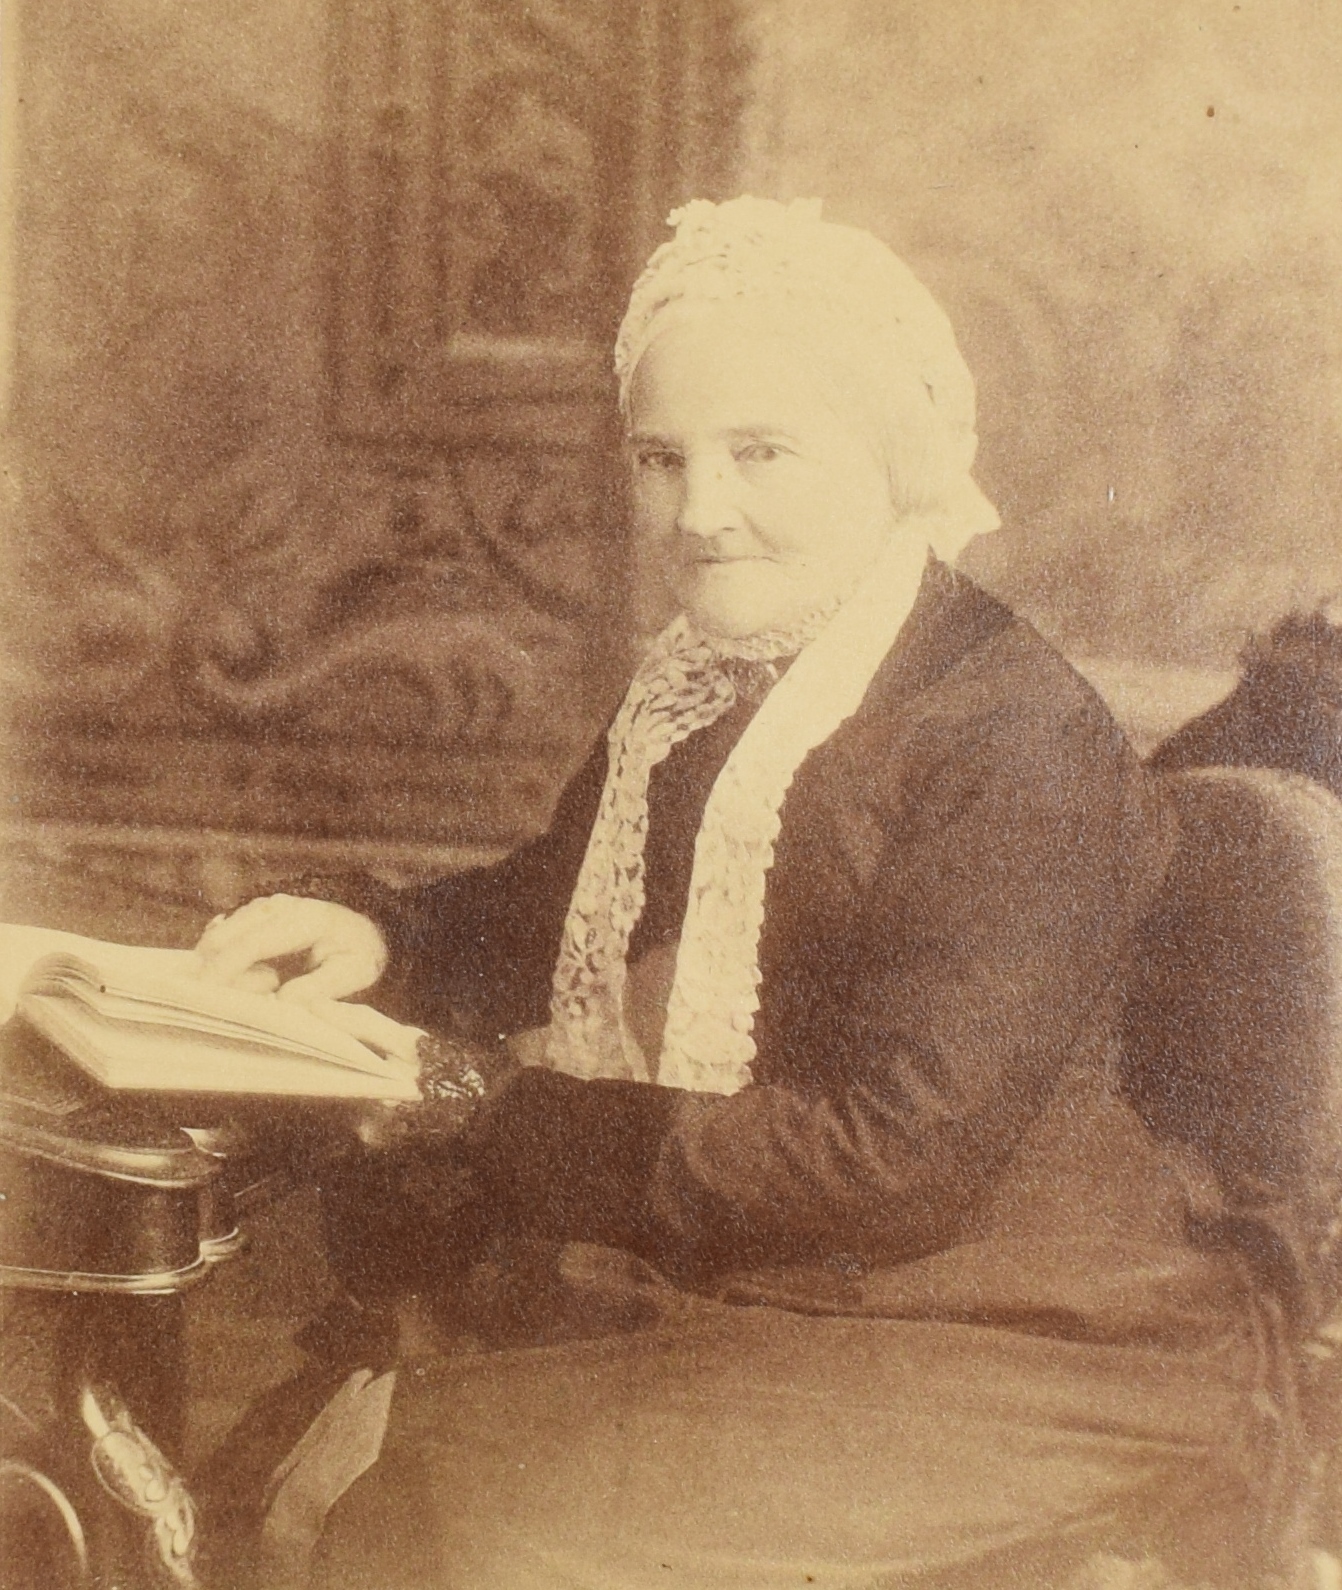 Sepia photograph of an elderly Frances Mary Smith, 1880, sitting, from the knees up. She is facing slightly left and looking at the camera with a calm expression. Her left hand rests on an open book on a desk. She is wearing a black dress and a white lace cap. Her white hair is tied behind her head, under the cap.